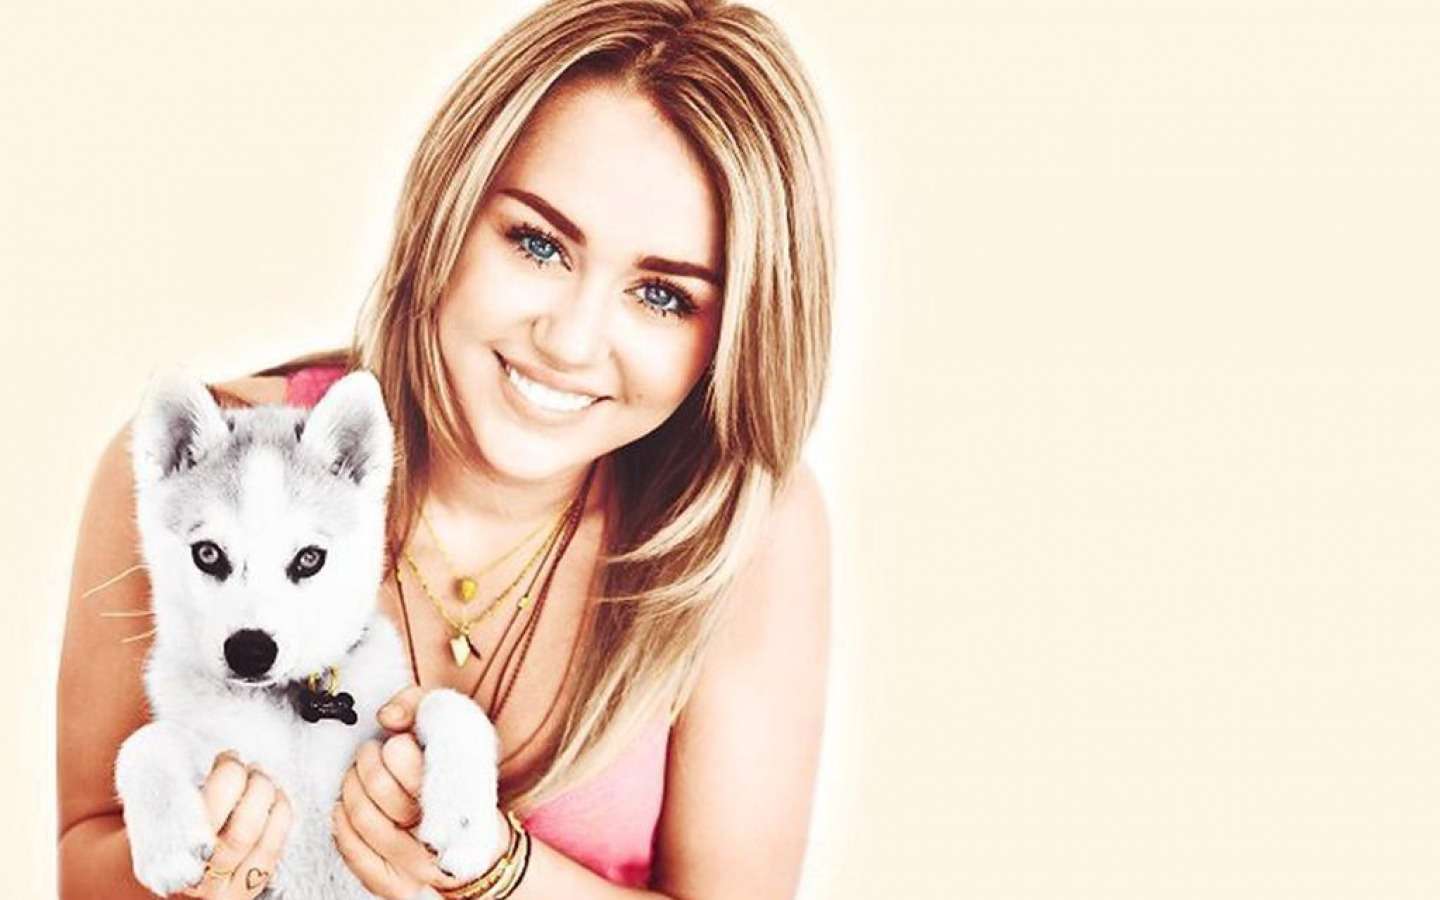 Miley Cyrus Photoshoot HD Wallpaper Background Image